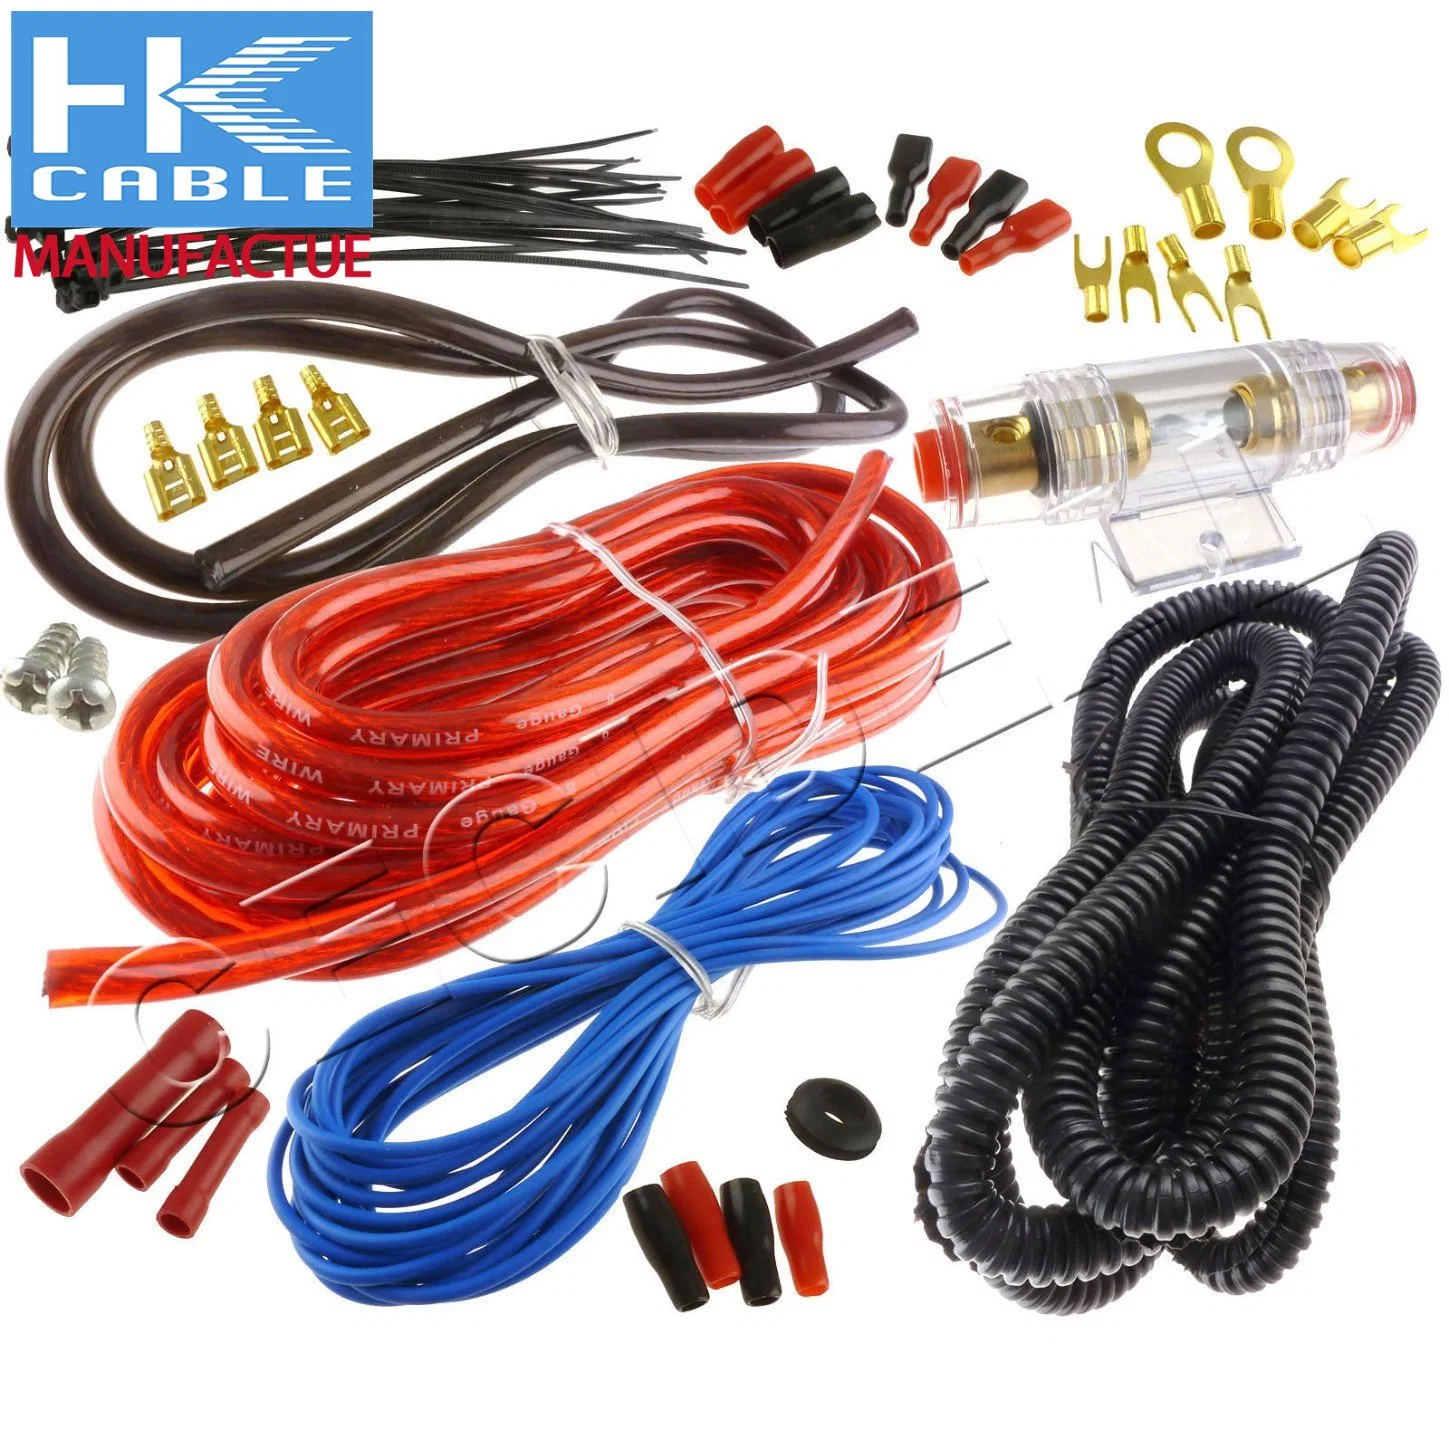 1 Set Car Audio Amplifier Subwoofer Speaker Installation Cable Wiring Kit RCA Audio Cable 10ga Power Cable Fuse Holder